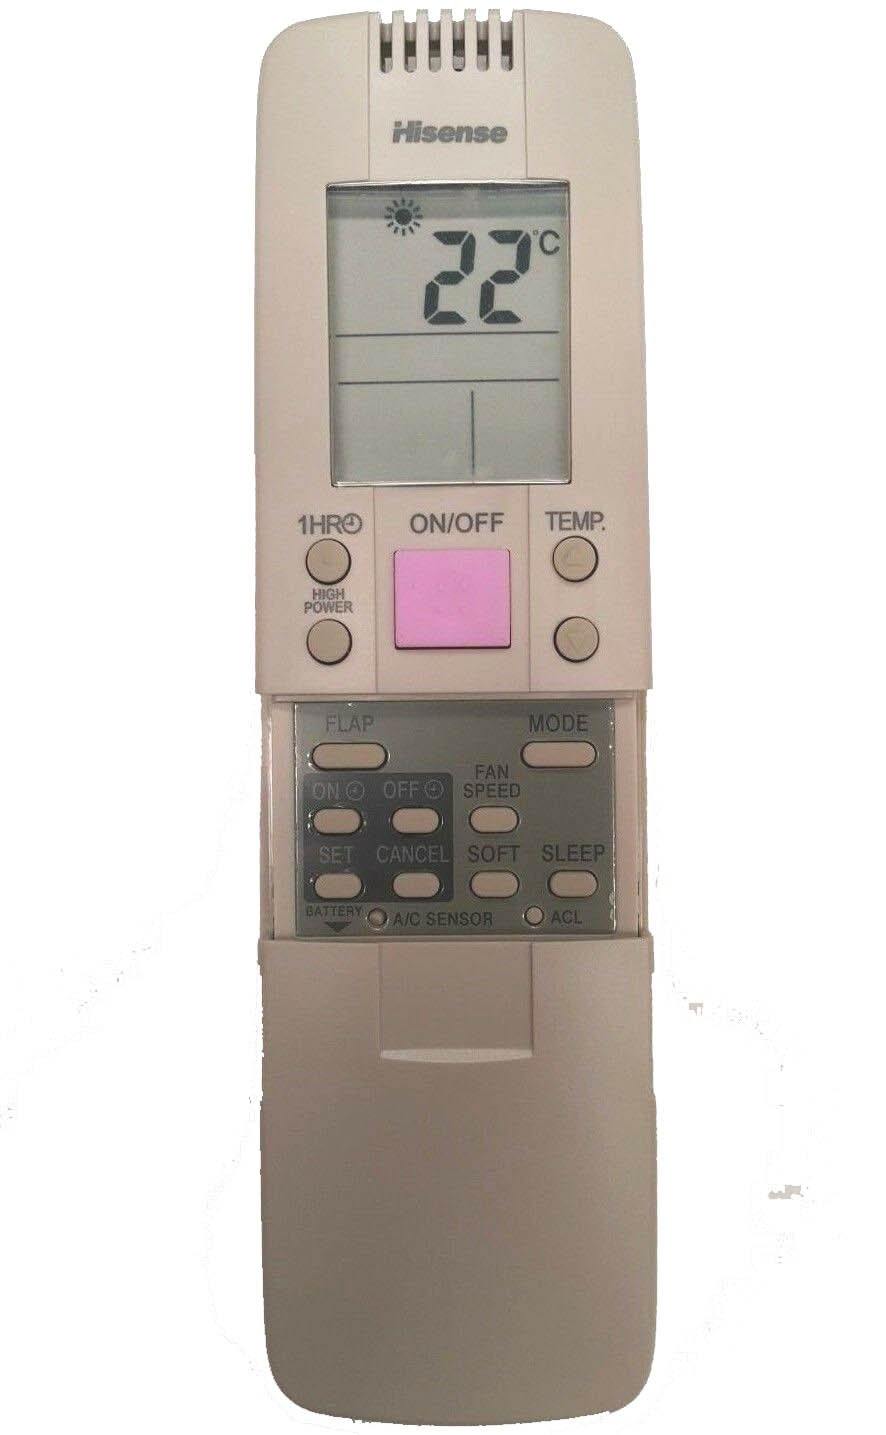 Replacement Aircon Remote for Hisense Model: RCH - China Air Conditioner Remotes :: Cheapest AC Remote Solutions